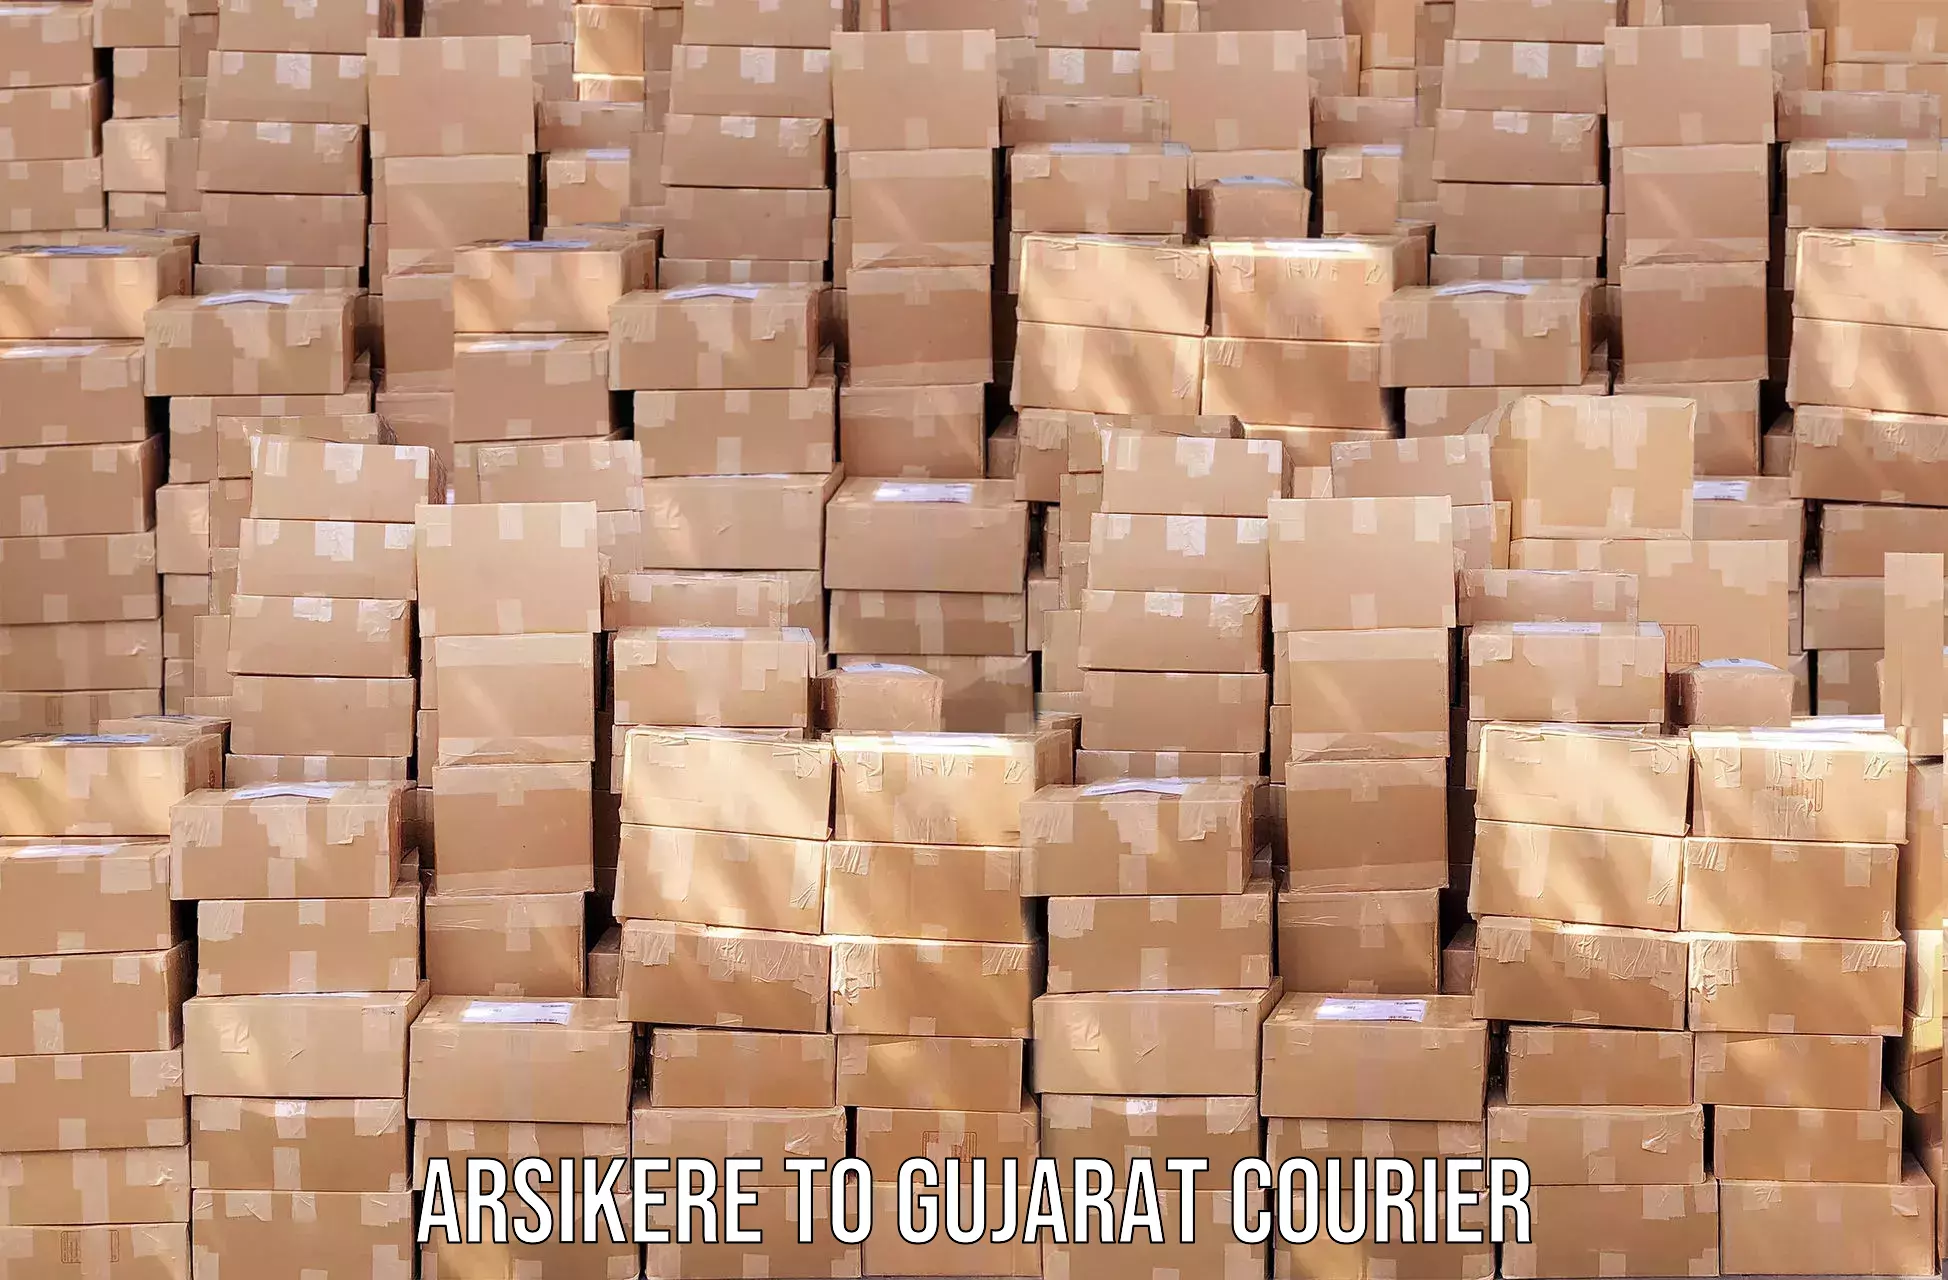 Personalized courier experiences Arsikere to Gujarat